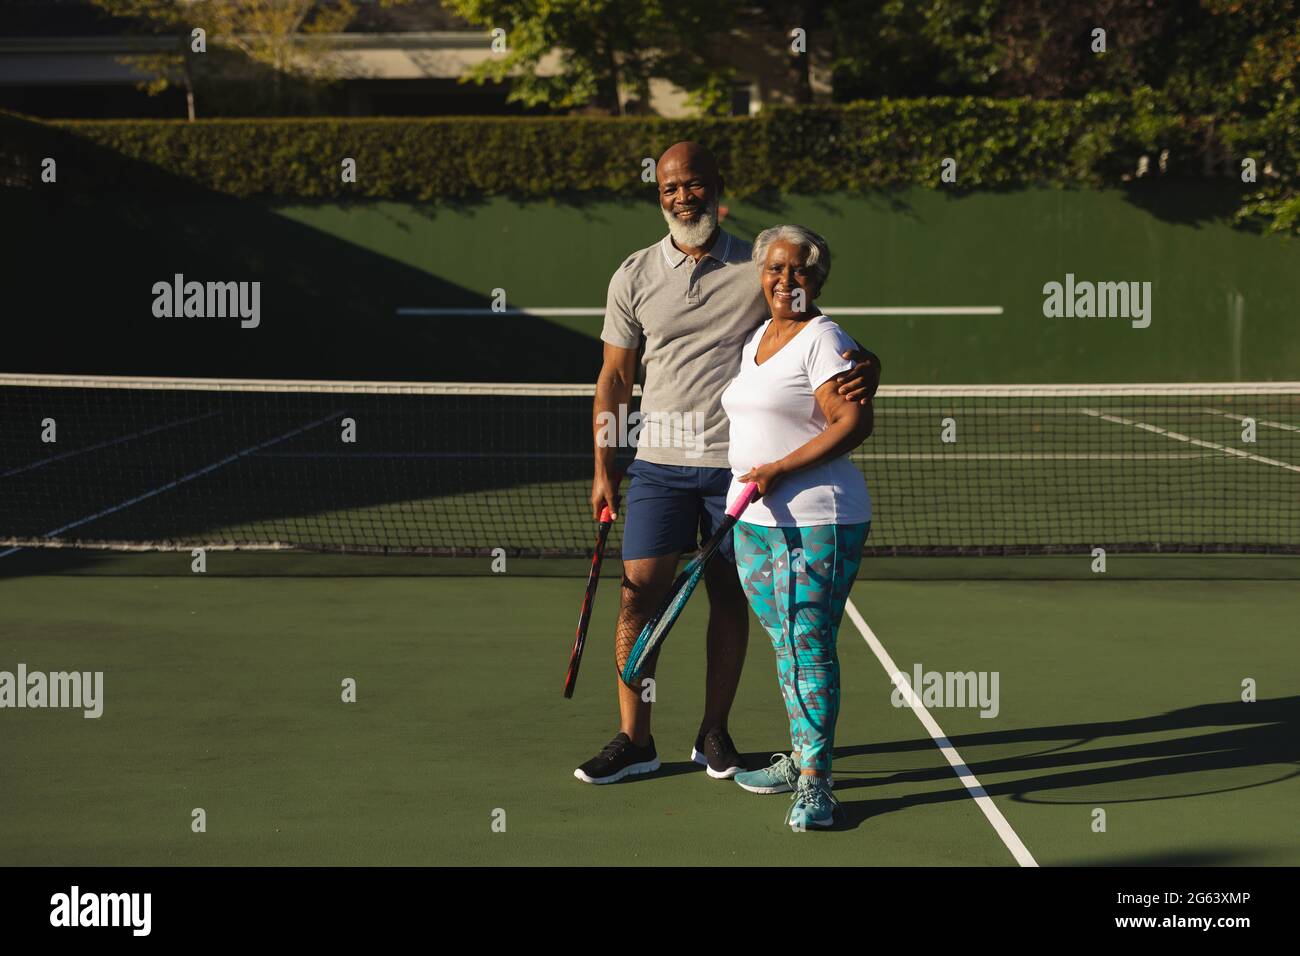 Portrait of smiling senior african american couple with tennis rackets on tennis court Stock Photo